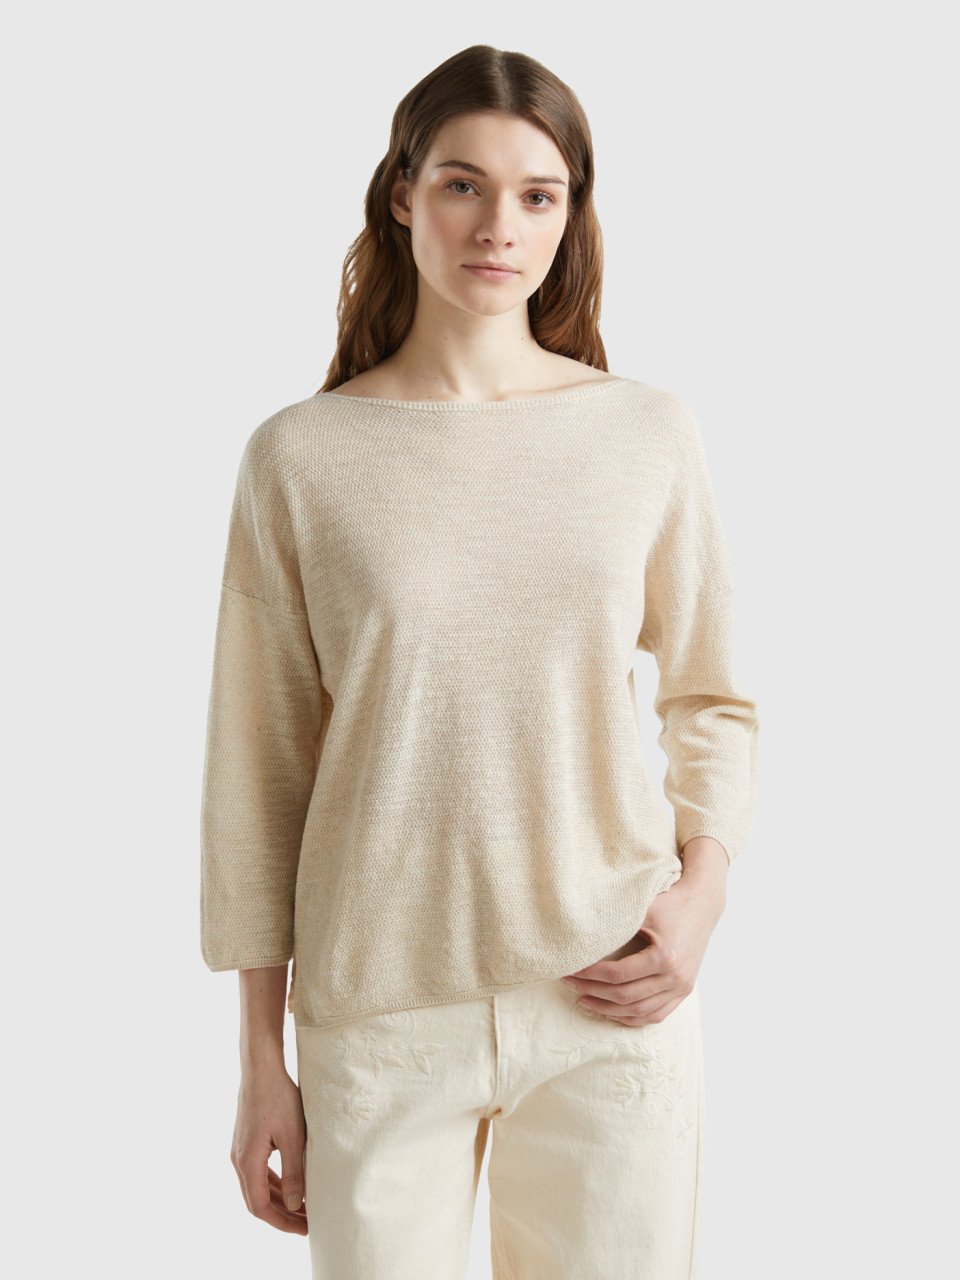 Benetton, Sweater In Linen Blend With 3/4 Sleeves, Creamy White, Women